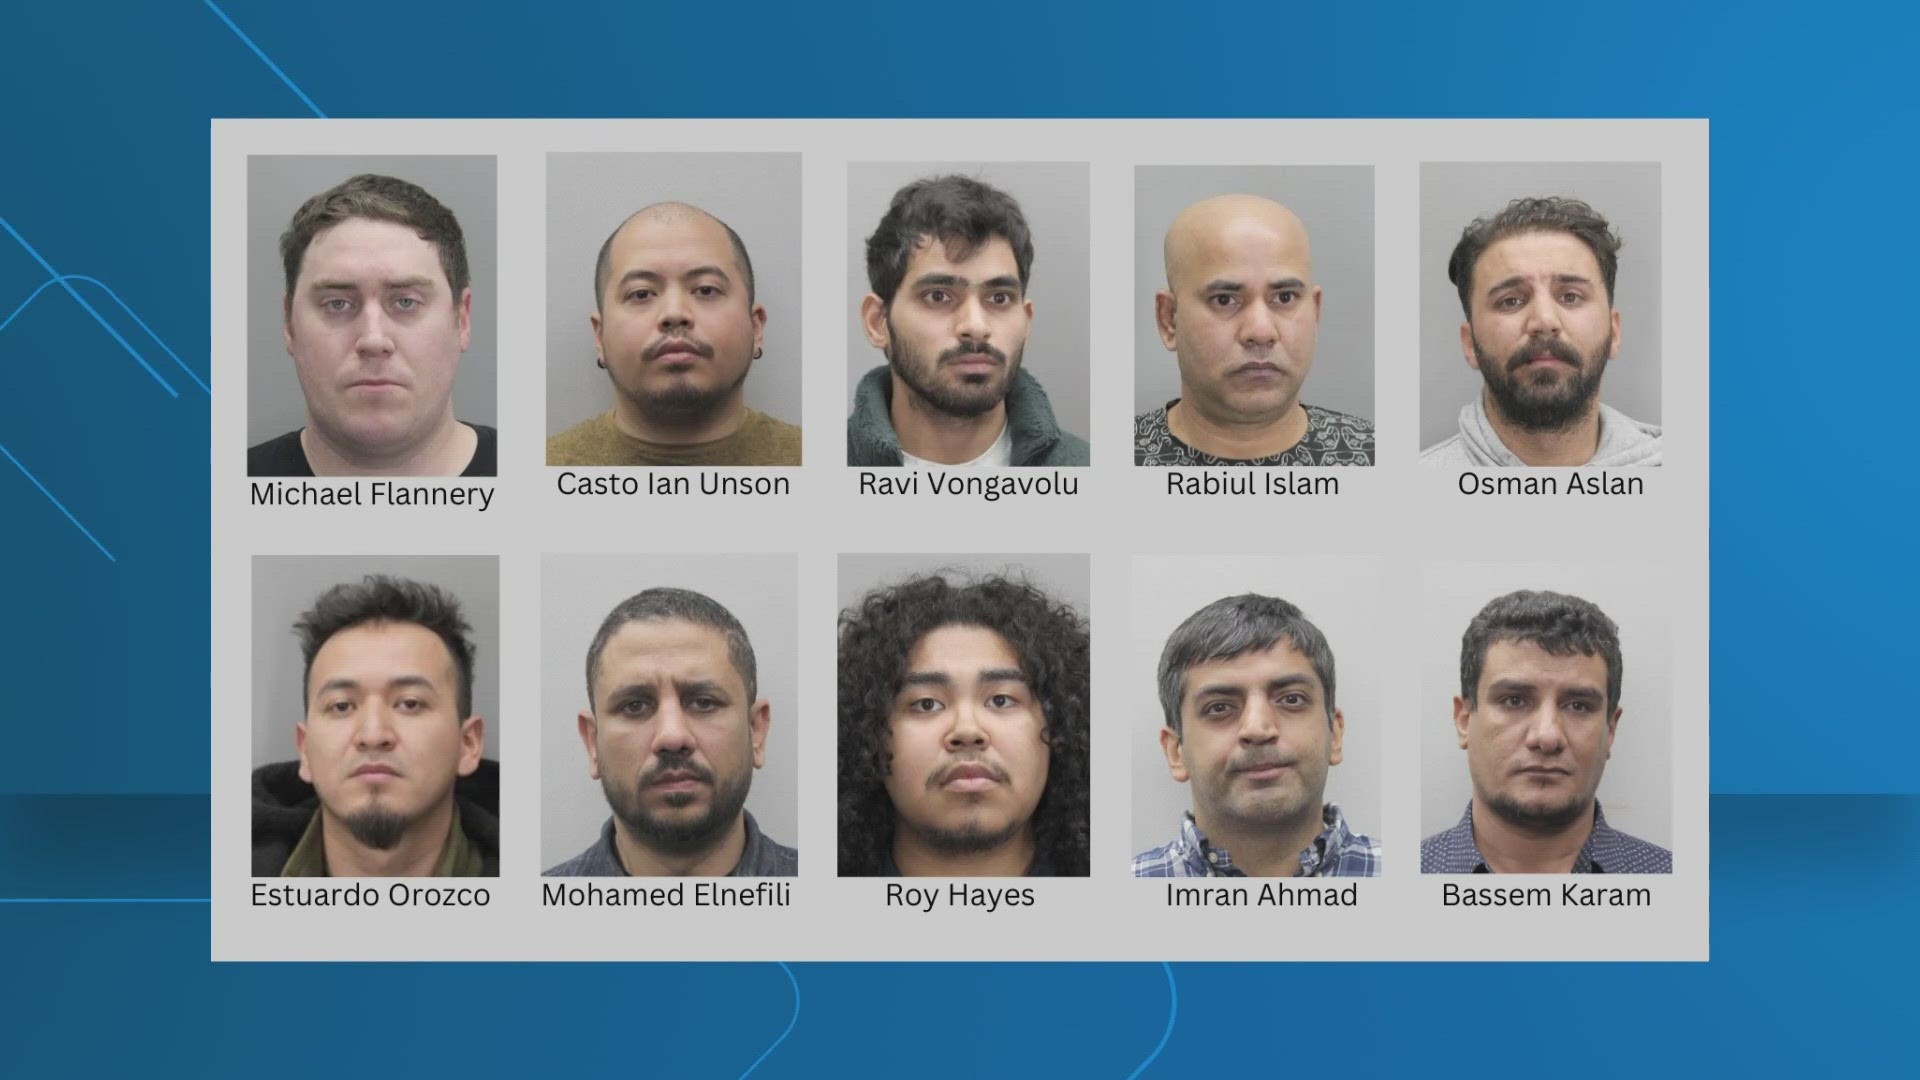 10 MEN ARE BEING HELD WITHOUT BOND AFTER POLICE SAY THEY SOUTH OUT ILLICIT SEXUAL ENCOUNTERS WITH 13-AND-14-YEAR OLD BOYS AND GIRLS.